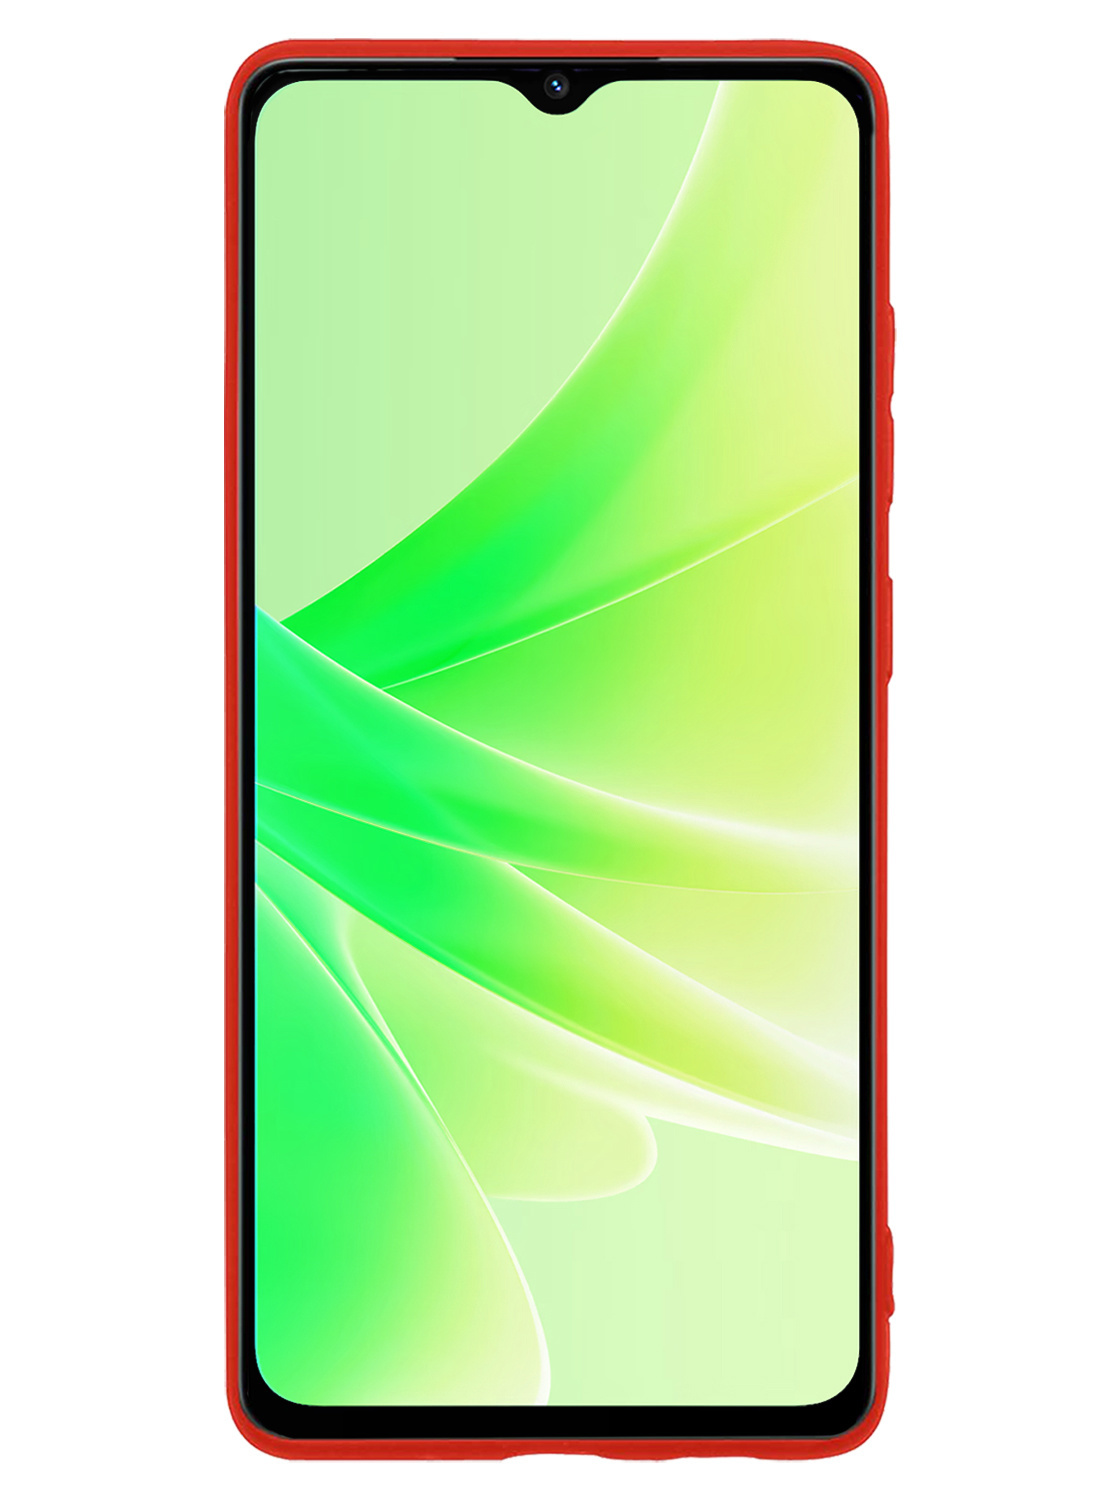 Nomfy OPPO A17 Hoesje Siliconen Case Back Cover Met Screenprotector - OPPO A17 Hoes Cover Silicone - Rood